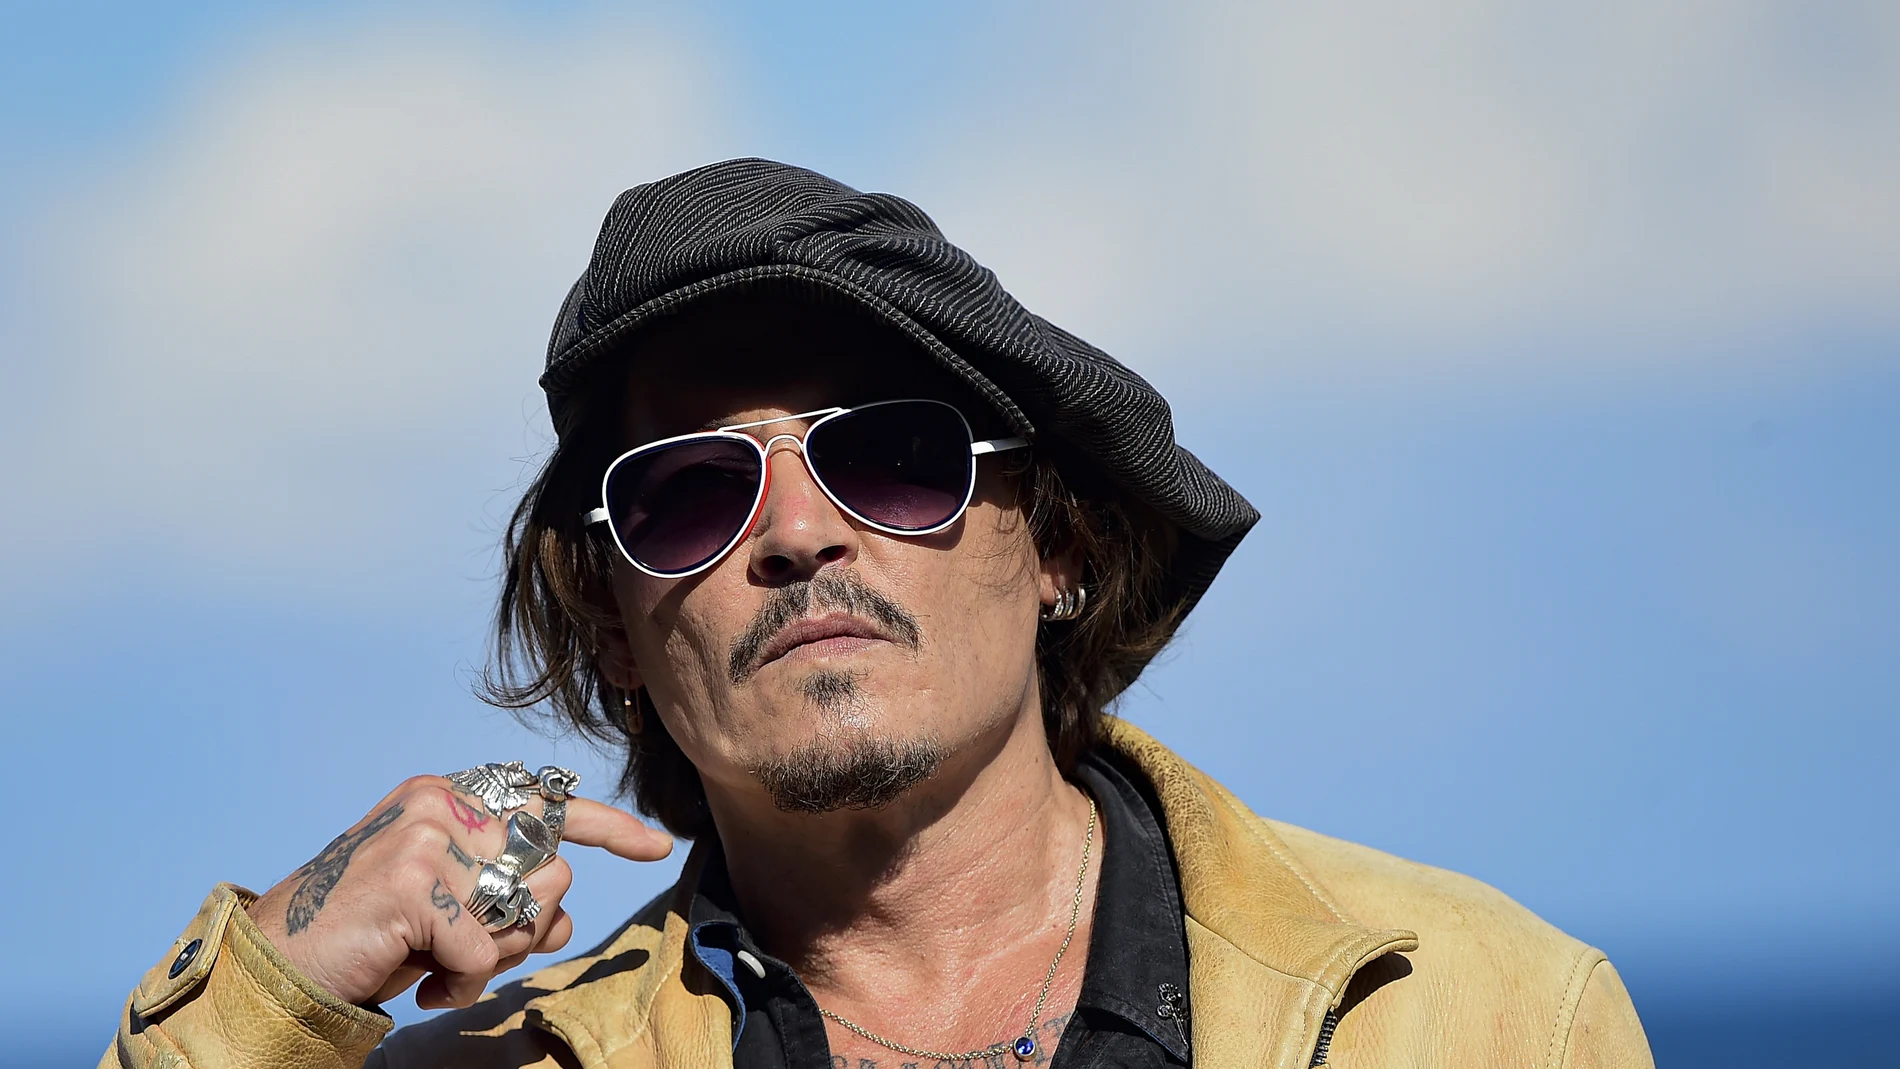 FILE - In this file photo dated Sunday, Sept. 20, 2020, US actor and film producer Johnny Deep during the photocall for his film "Crock of Gold: A Few Rounds with Shane Macgoman" at the 68th San Sebastian Film Festival, in San Sebastian, northern Spain. Appeal judges said the Hollywood star cannot challenge the High Courtâ€™s rejection of his libel lawsuit against publisher of The Sun newspaper for labeling him a â€œwife beaterâ€ in an article. High Court Justice Andrew Nicol ruled in November that allegations against Depp, made in a April 2018 article, were â€œsubstantially true.â€ The judges said Thursday that the earlier court hearing was â€œfull and fairâ€ and the justiceâ€™s conclusions â€œhave not been shown even arguably to be vitiated by any error of approach or mistake of law.â€ (AP Photo/Alvaro Barrientos, File)